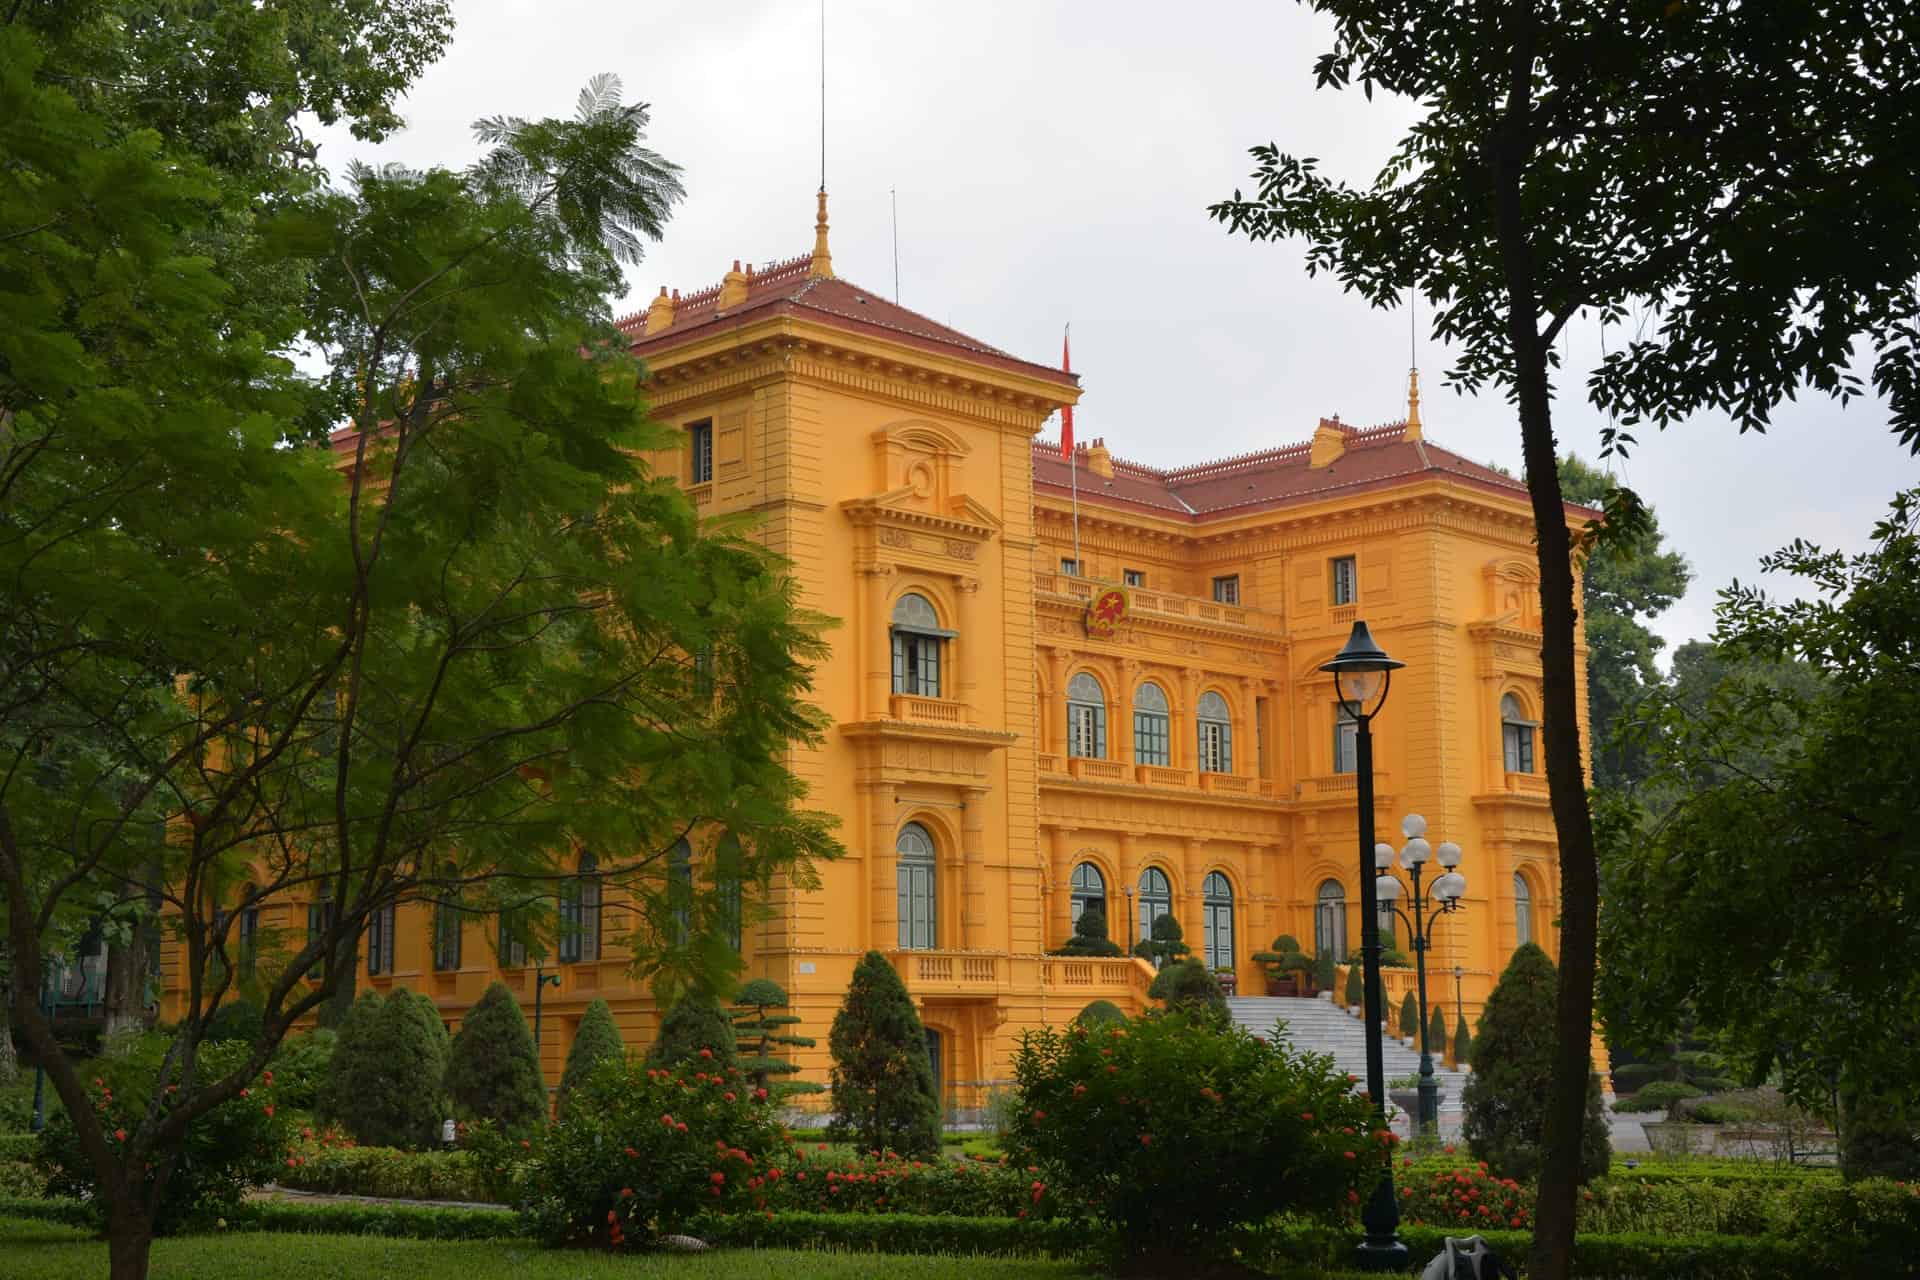 Best things to do in Hanoi Vietnam - Paul Kennedy - Presidential Palace by Sandip Roy on Unsplash